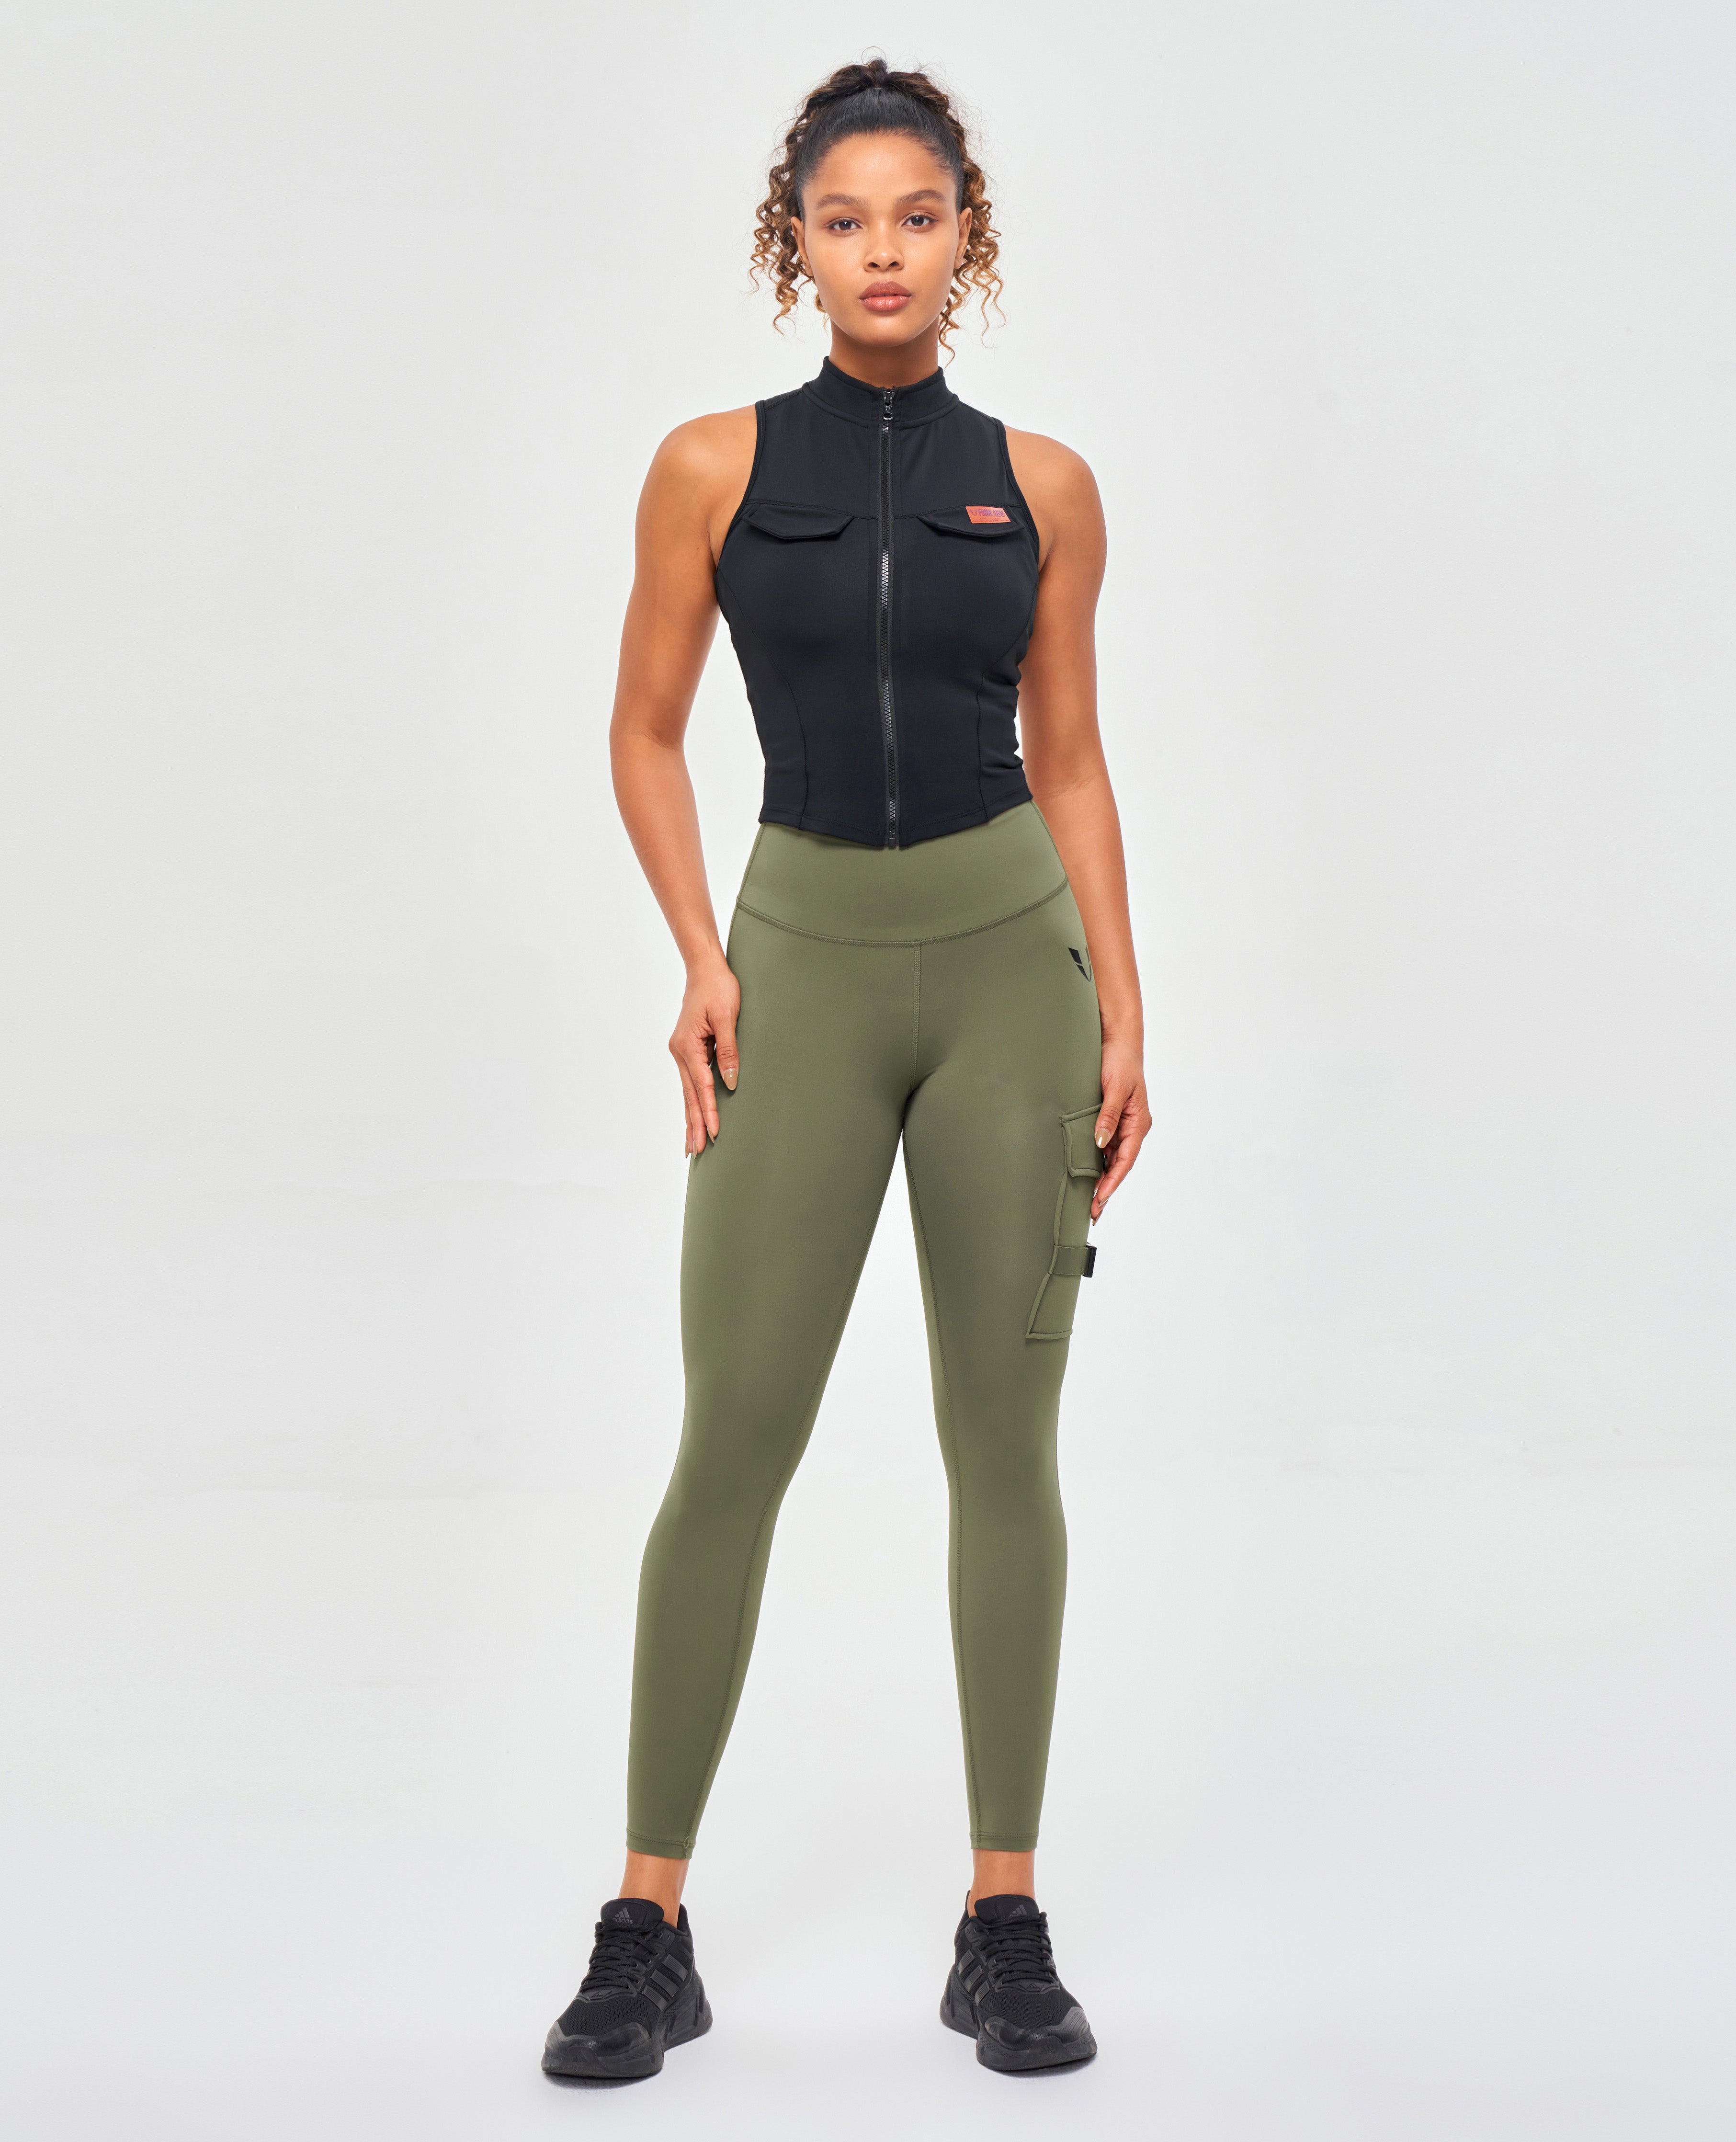 Cargo Pocket Flare Leggings - Olive Green, FIRM ABS